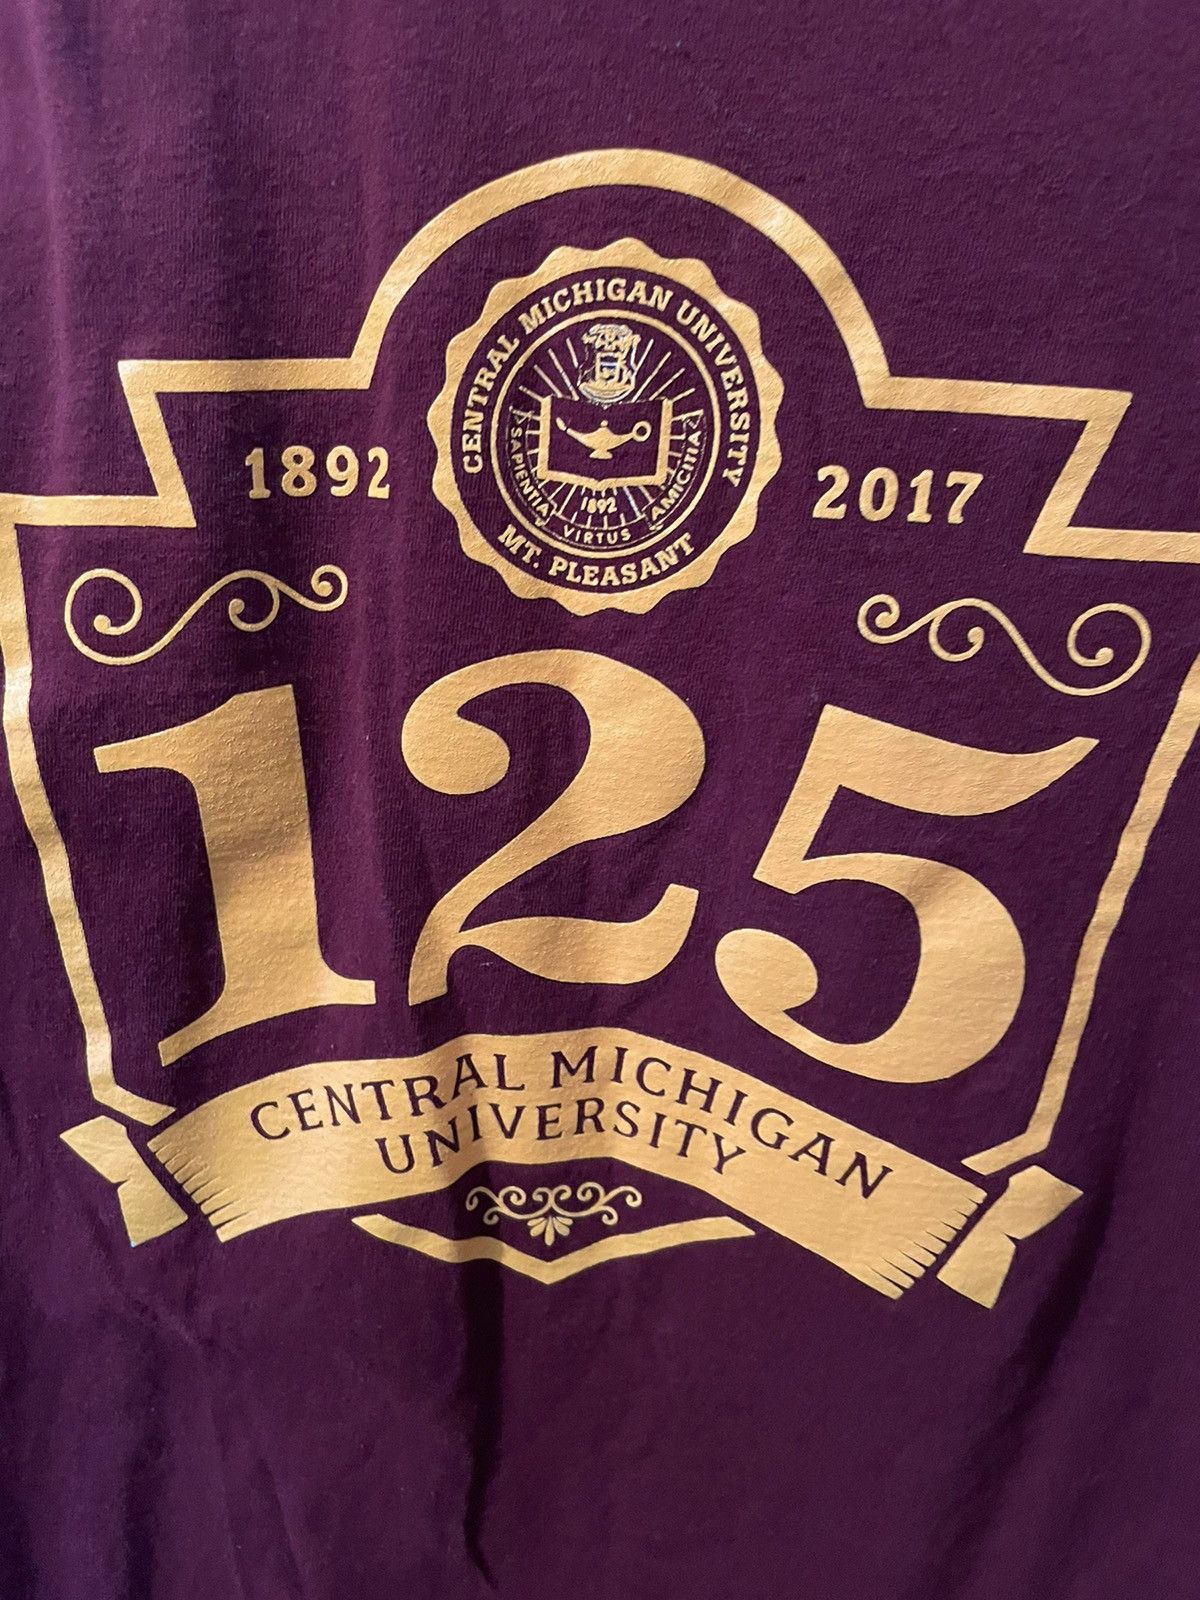 Vintage Central Michigan University 125th anniversary LS Tee Size US XL / EU 56 / 4 - 2 Preview